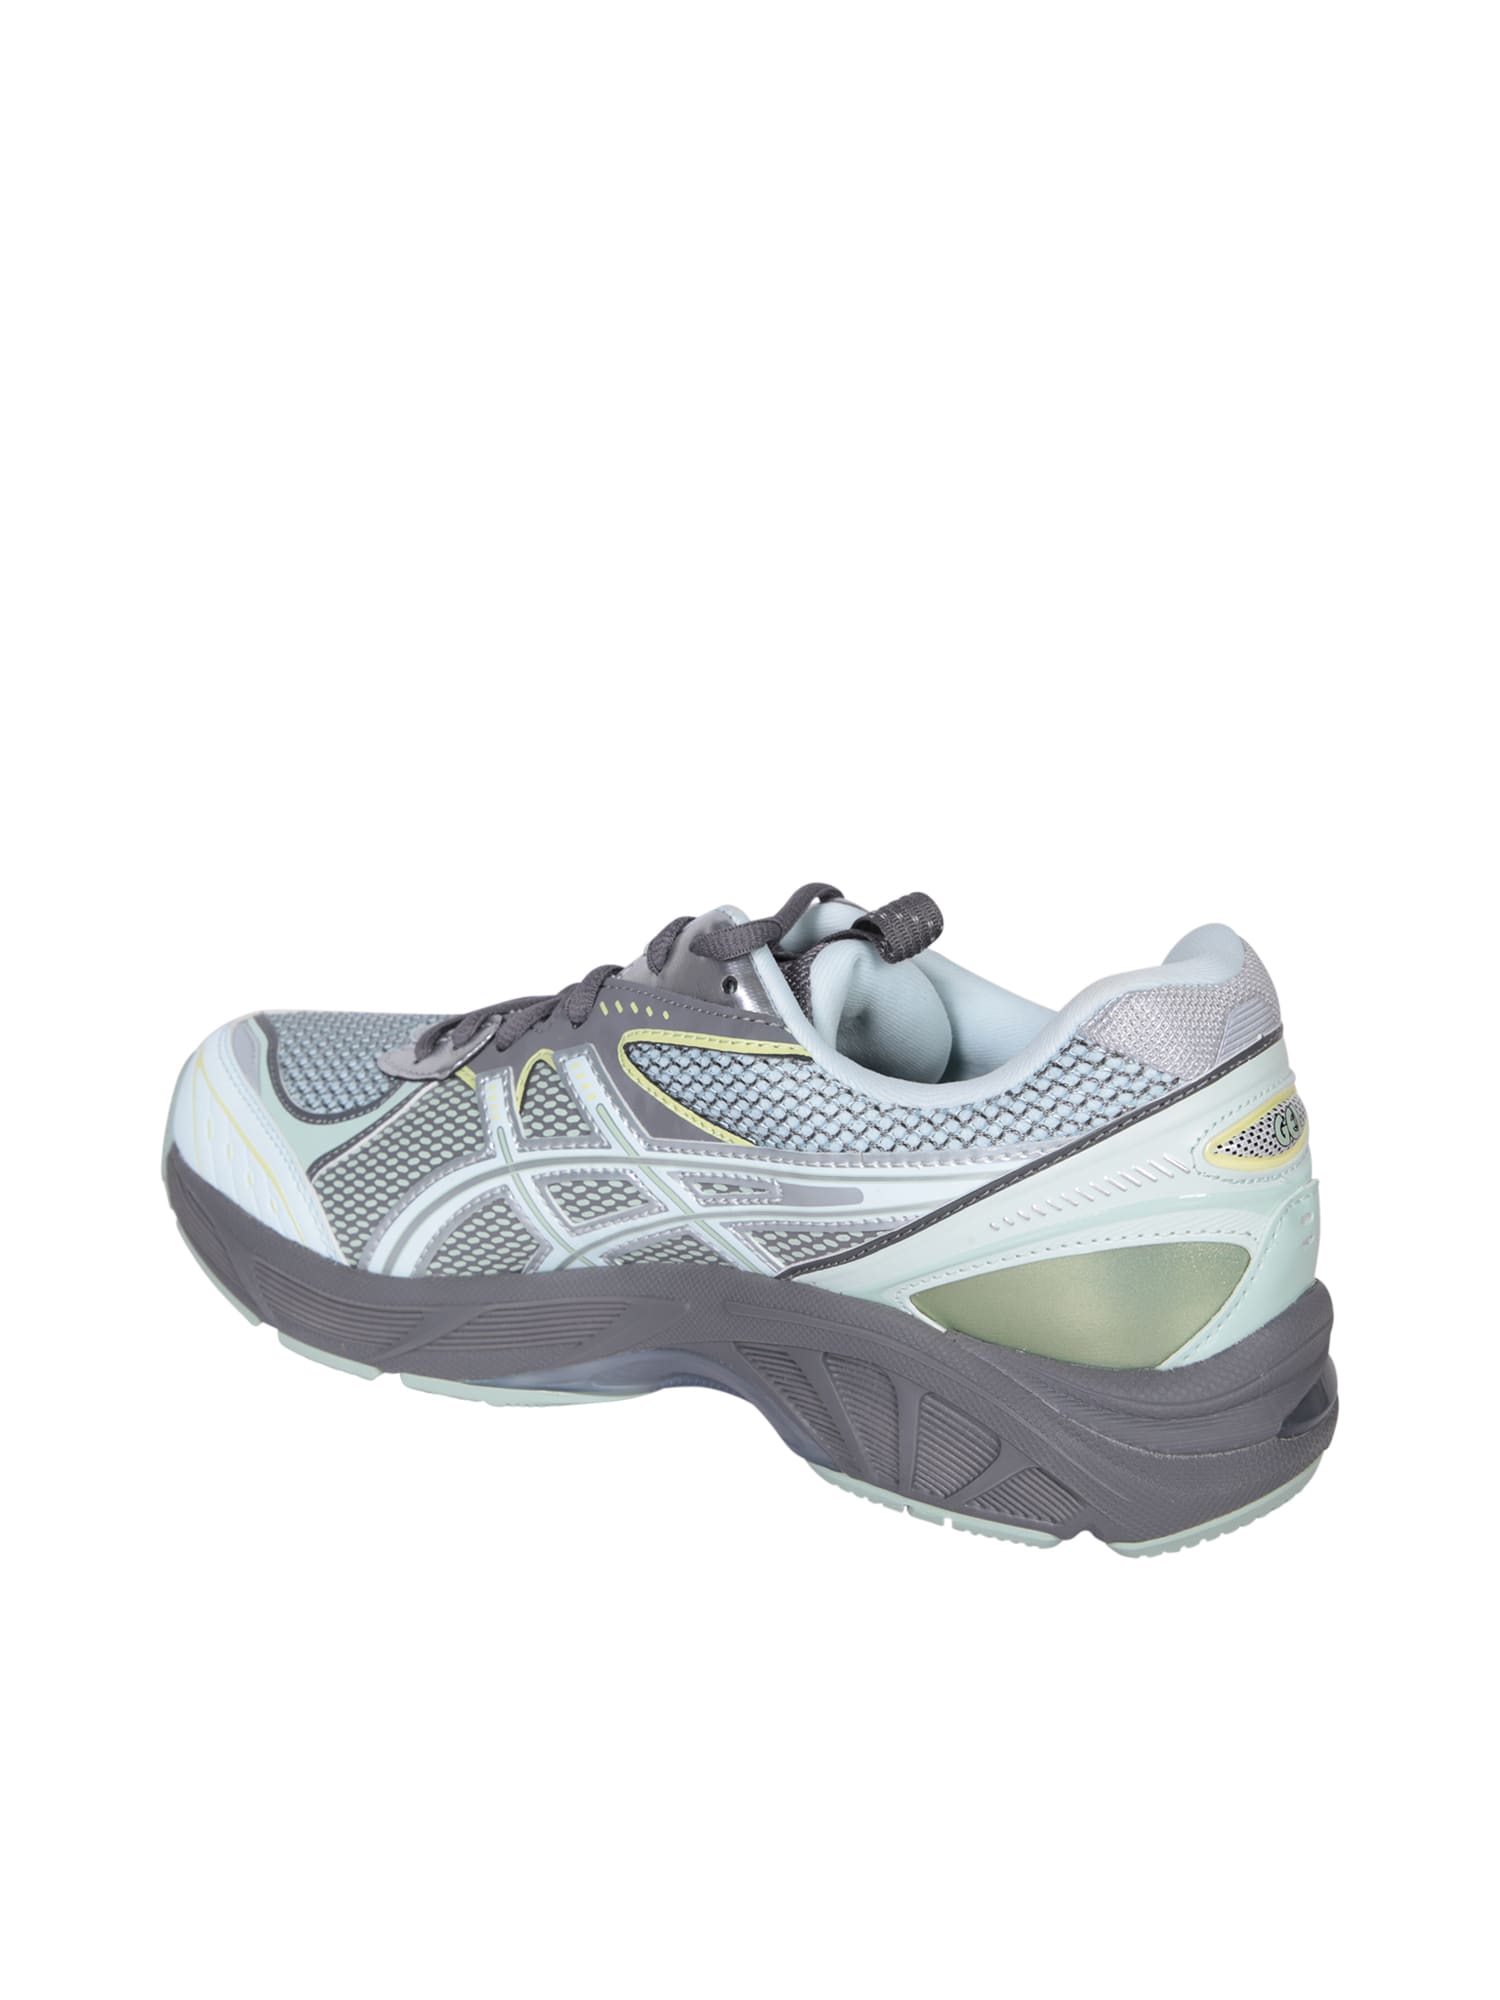 Shop Asics Ub6s Gt2160 Sneakers In Grey And Light Blue